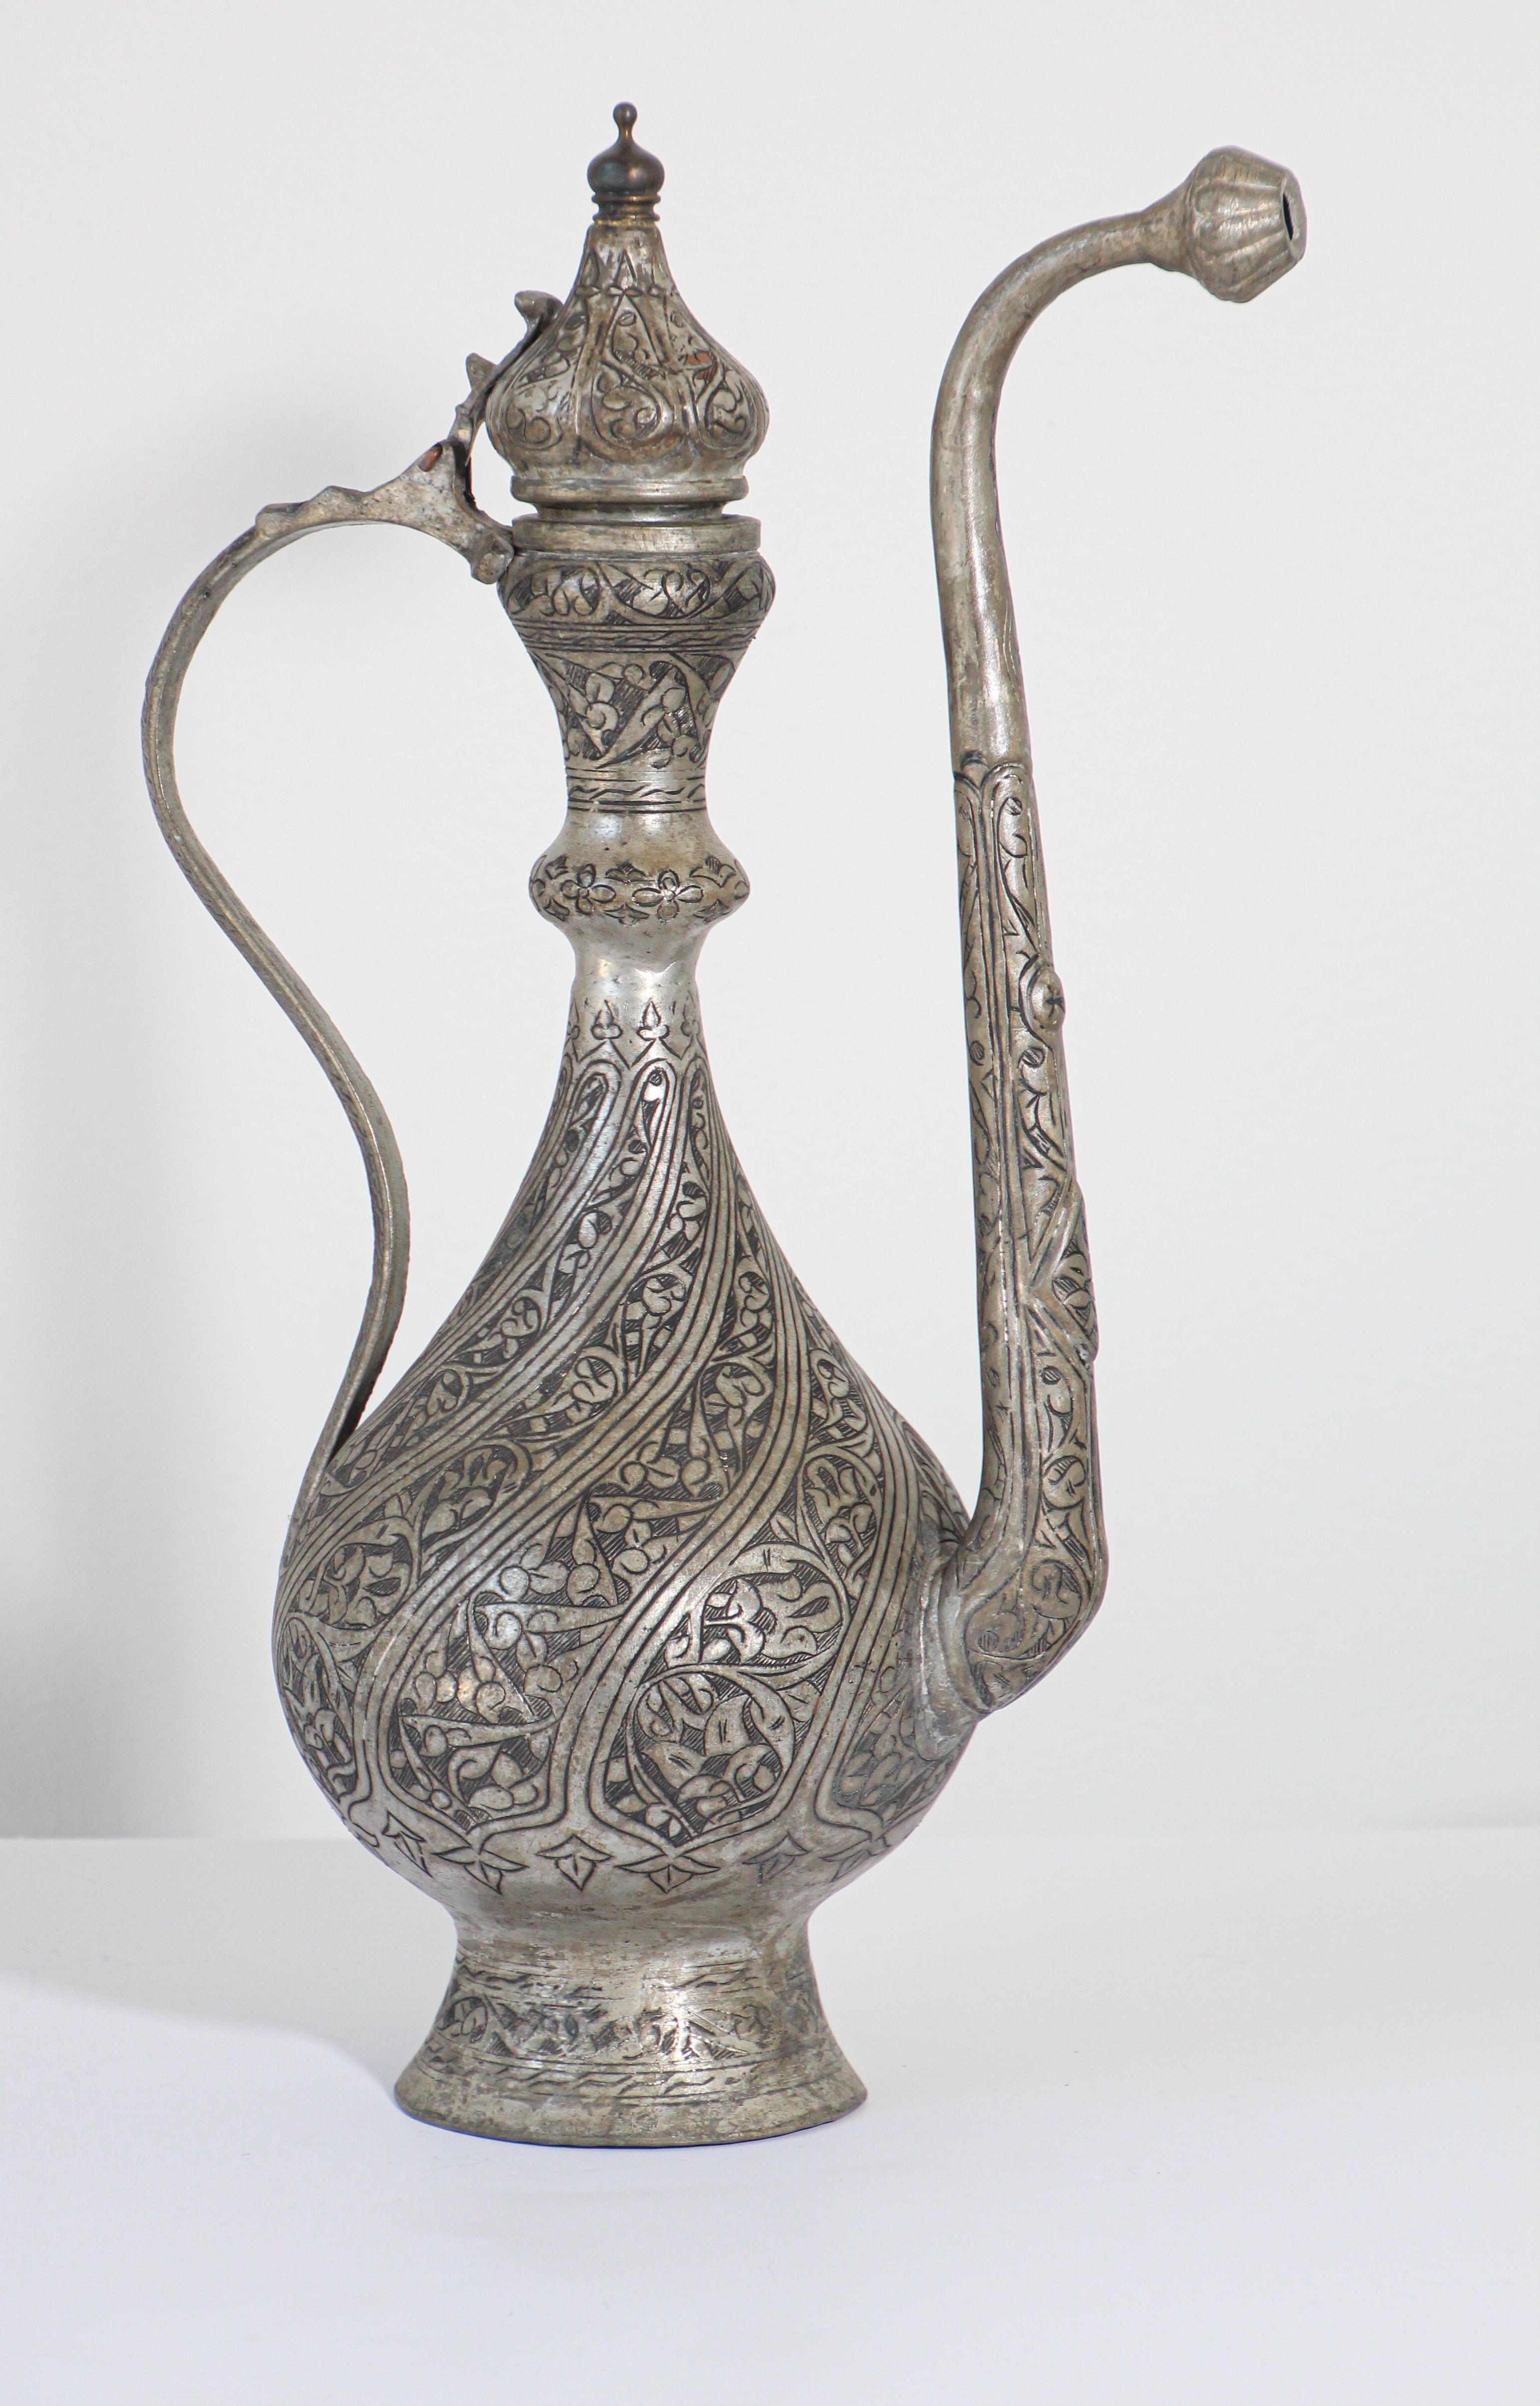 Handcrafted antique 19th century Islamic Turkish Ottoman tinned copper ceremonial water ewer.
Antique Middle Eastern Asian Islamic style ewer jug metalware vessel.
The bulbous body with flared foot, long tapering neck with bulbous top and pointed